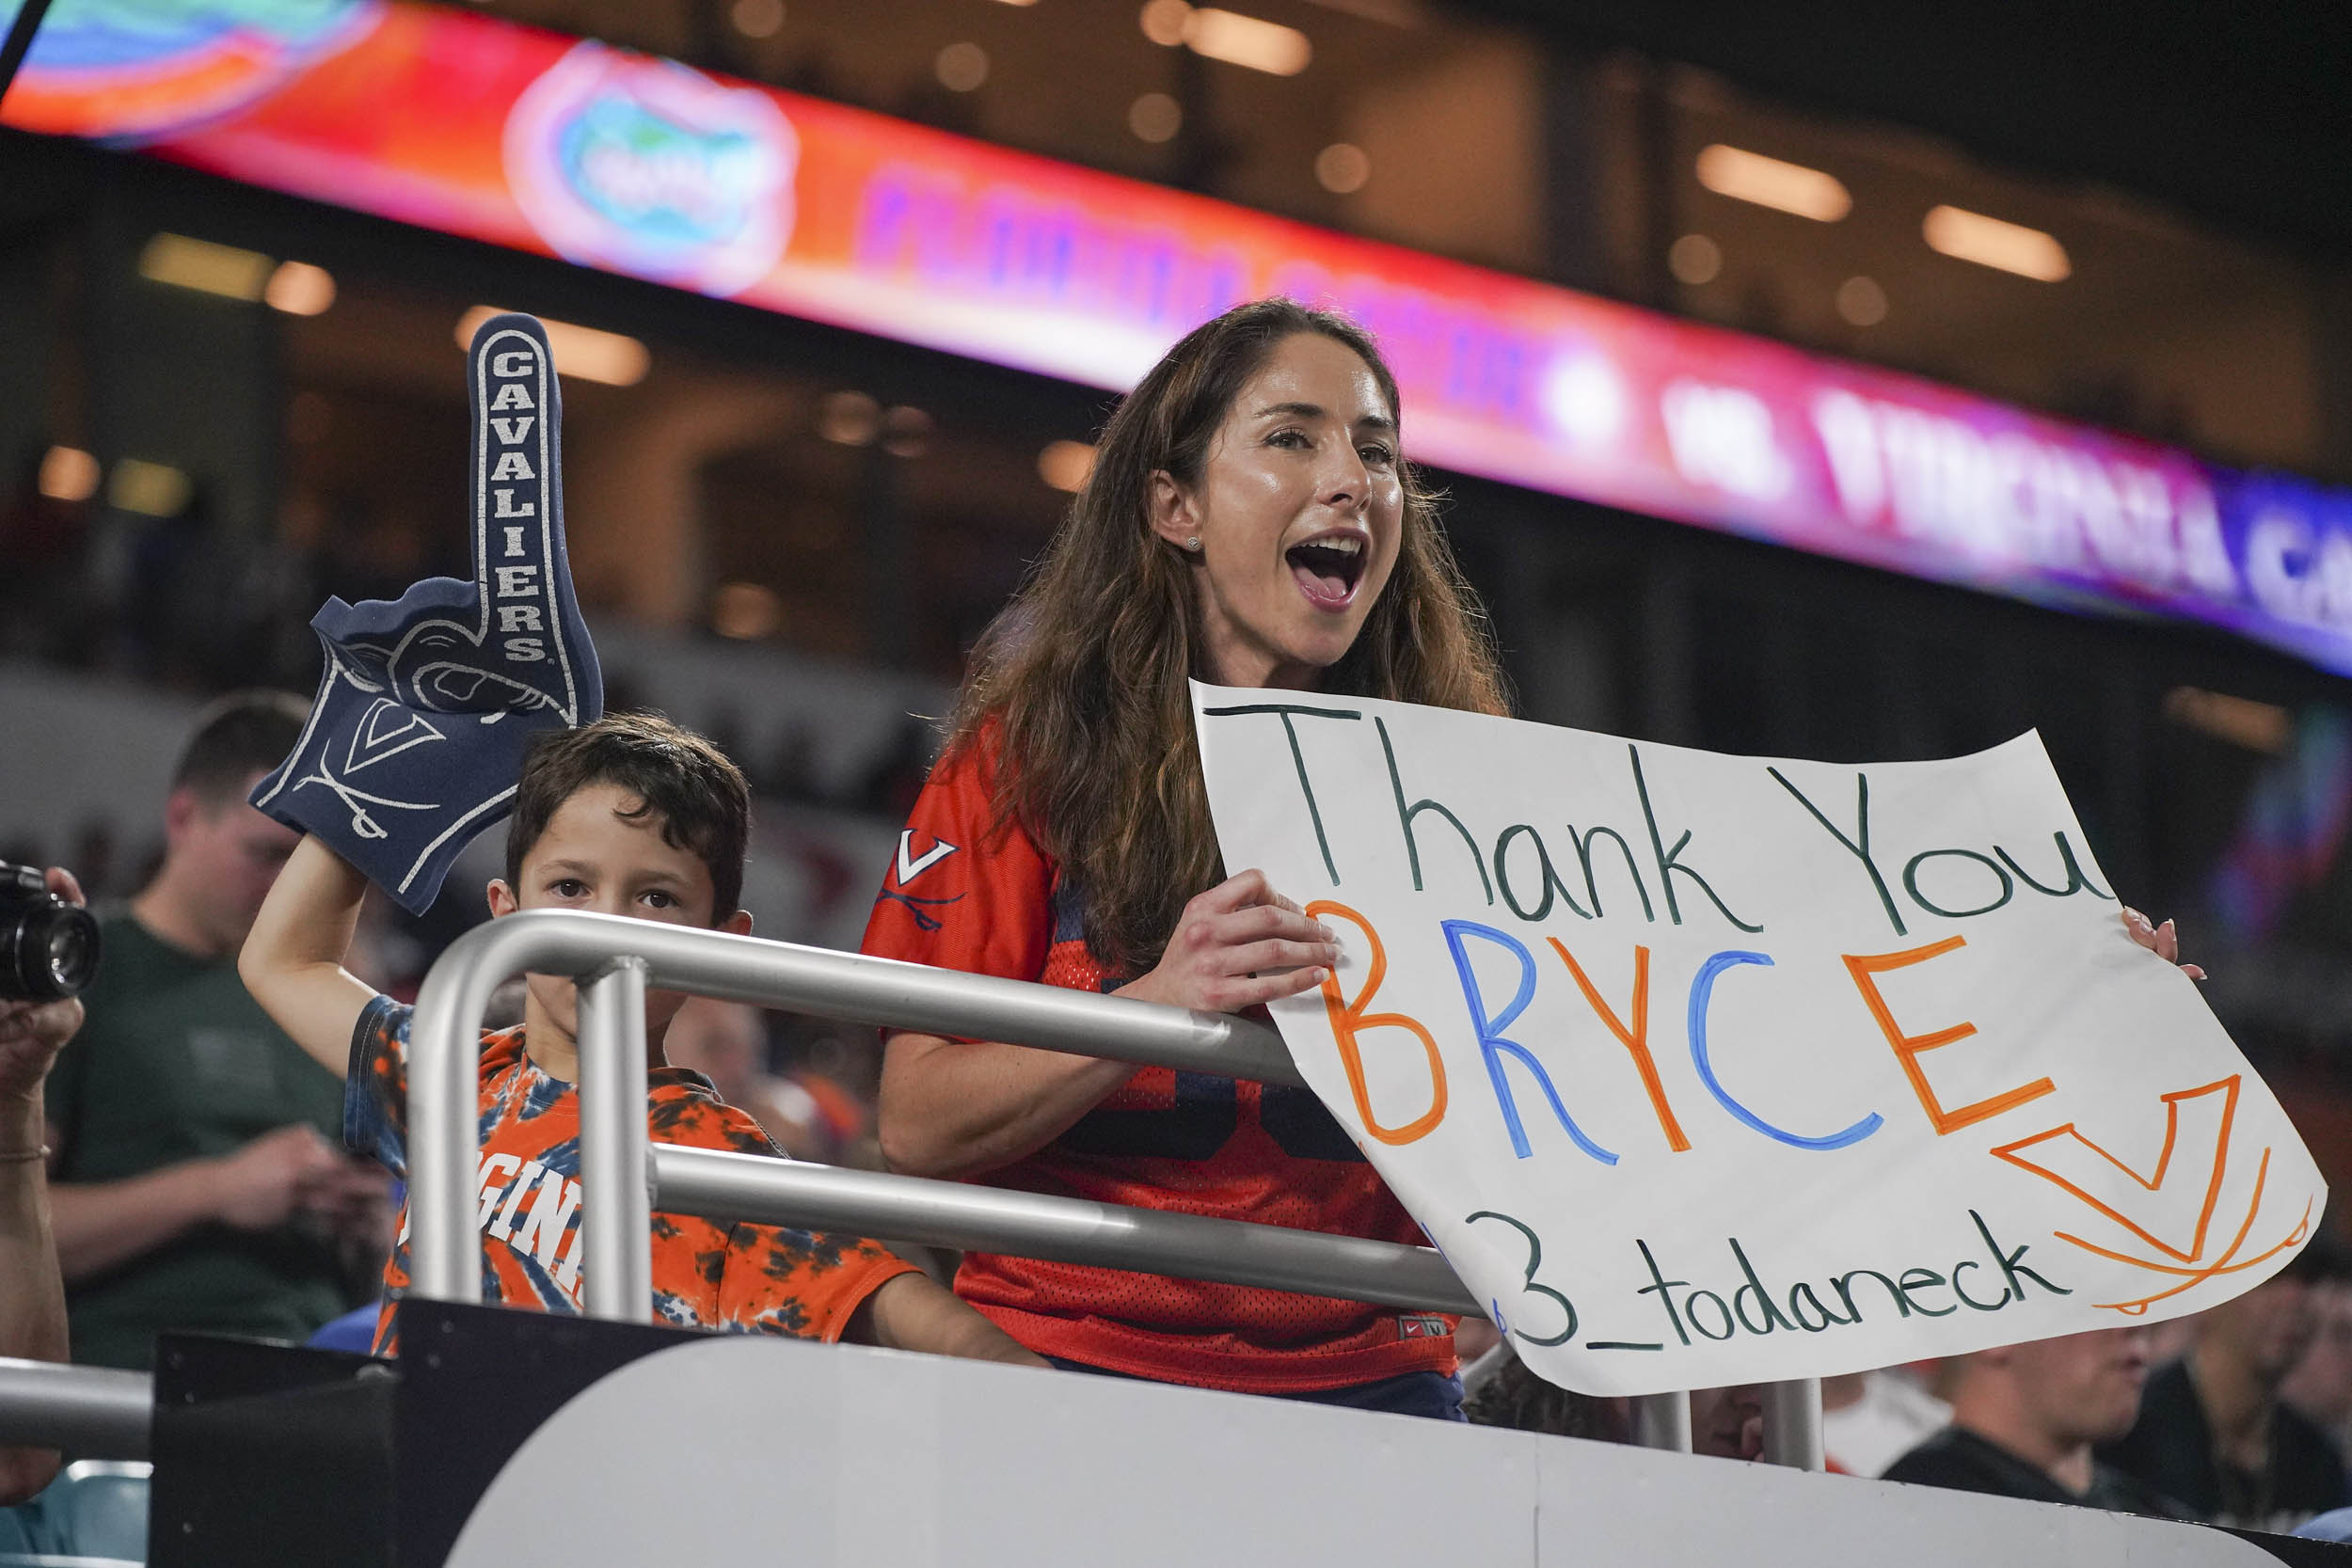 UVA Fan holding a sign that reads Thank you Bryce